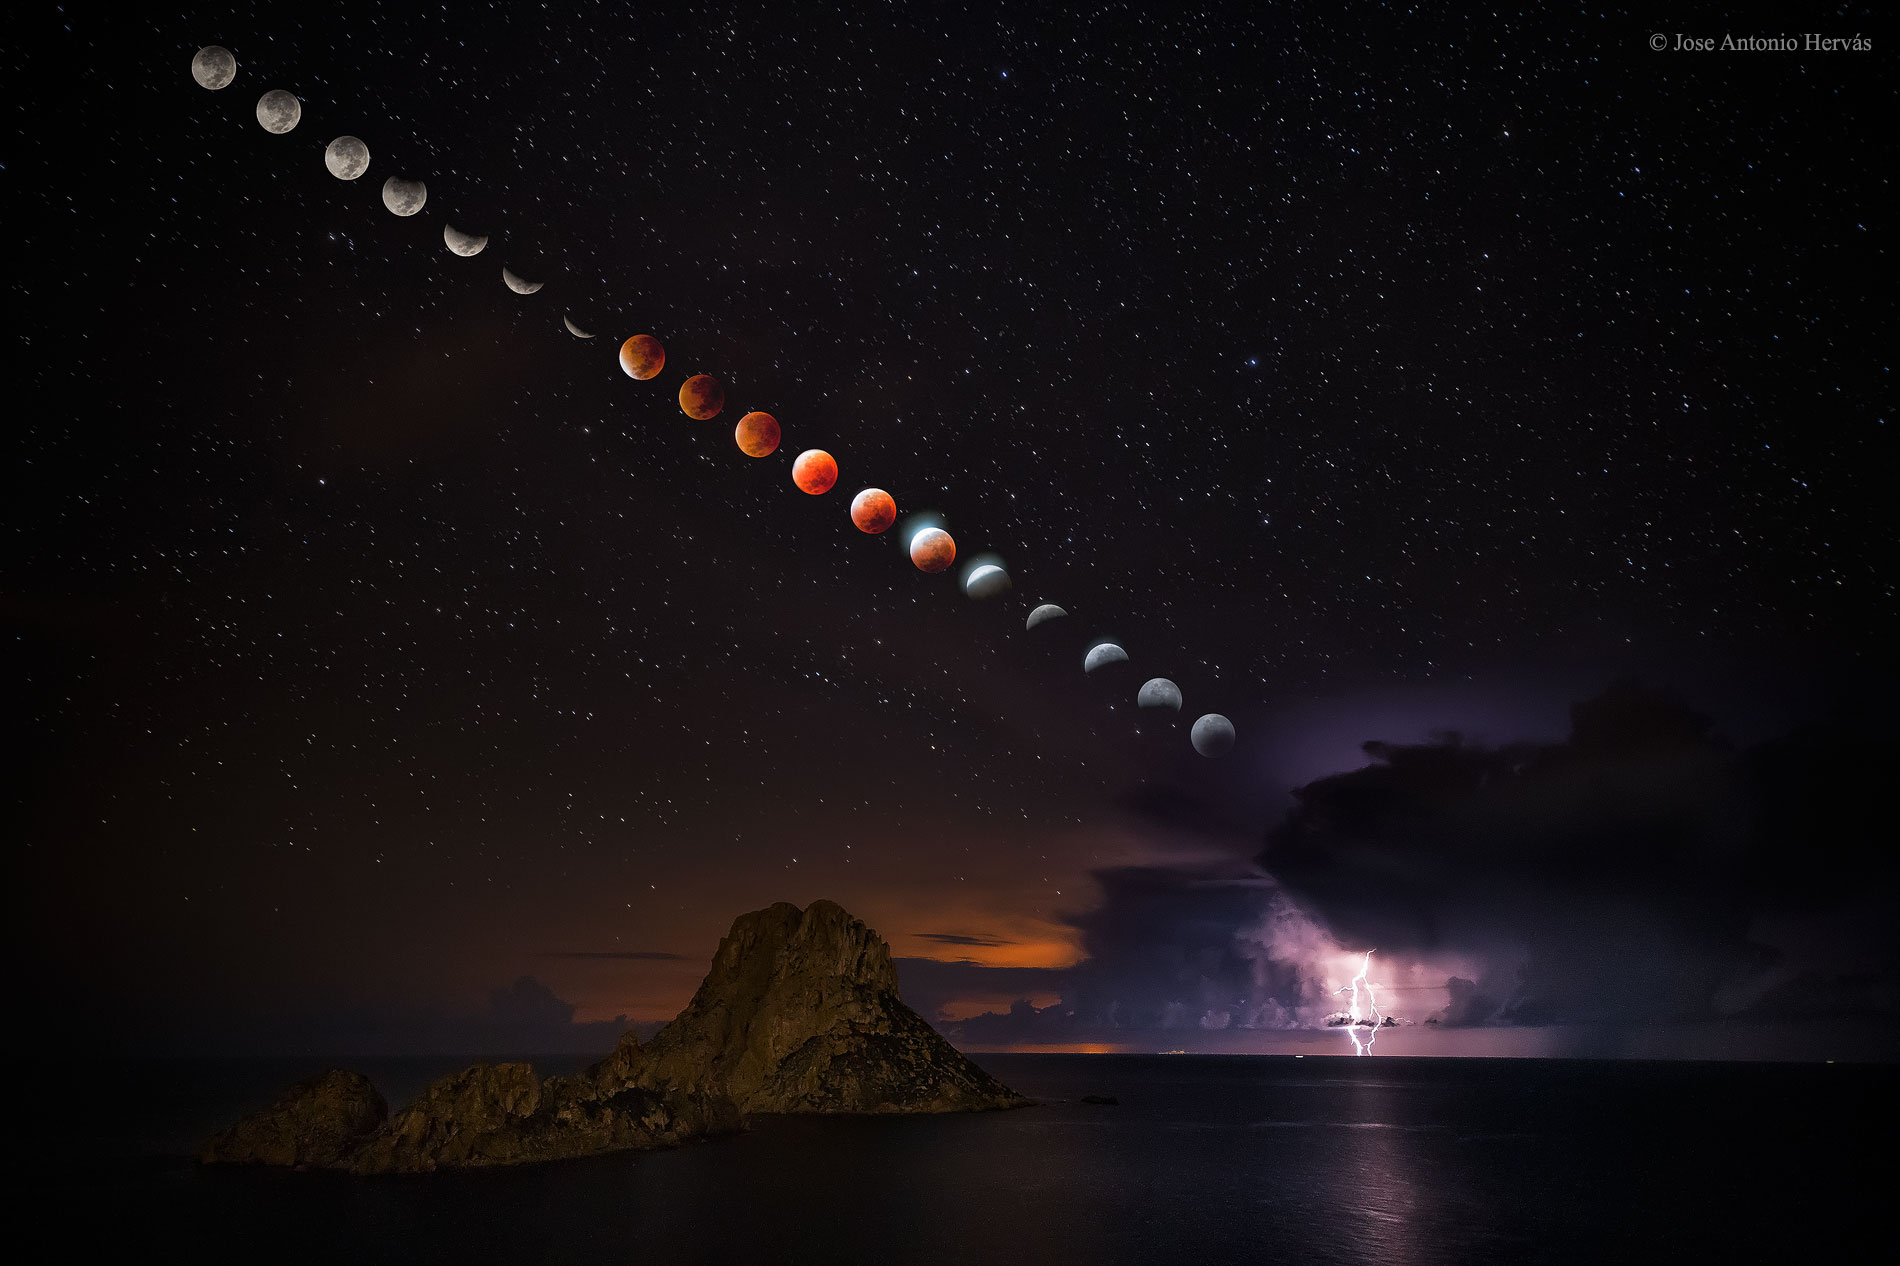 Super Blood Moon, A Glowing Turtle, And Other Amazing Images Of The Week